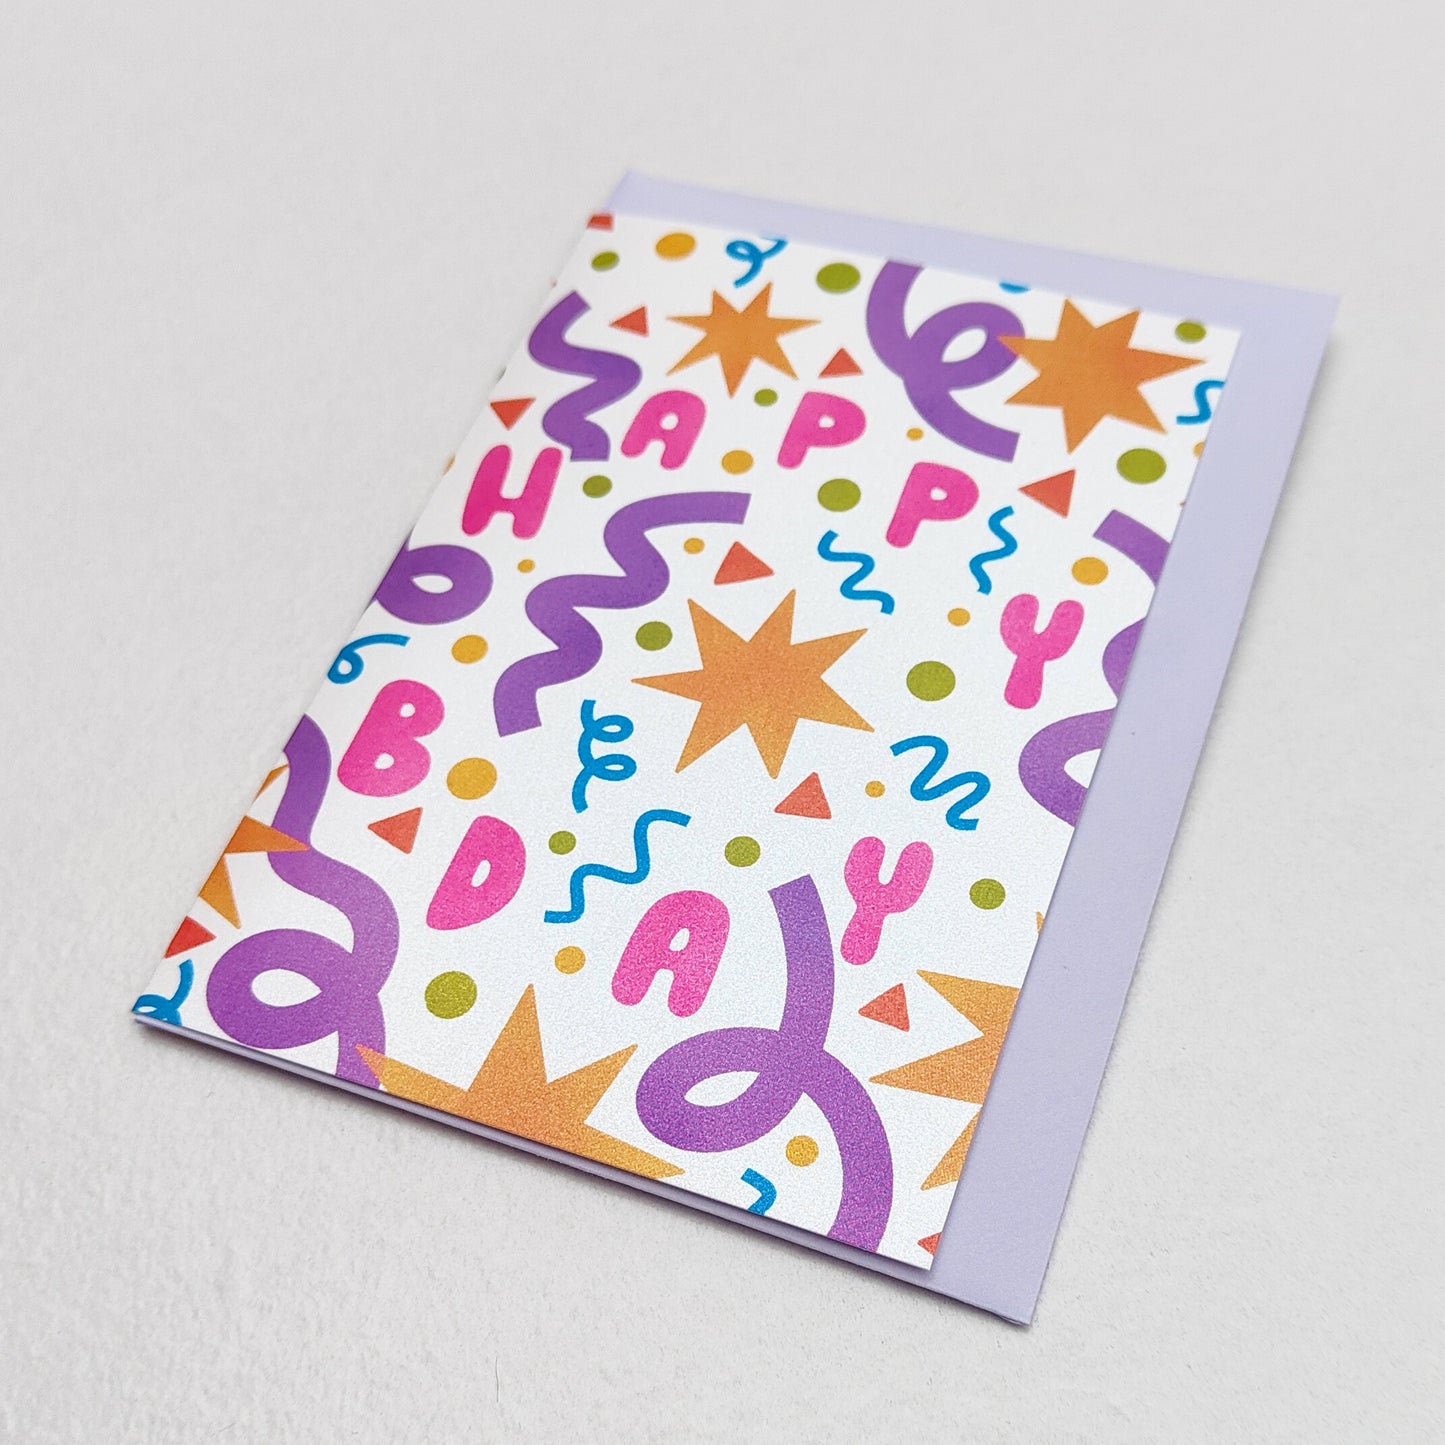 Happy Bday Colourful Shapes Birthday Greetings Card